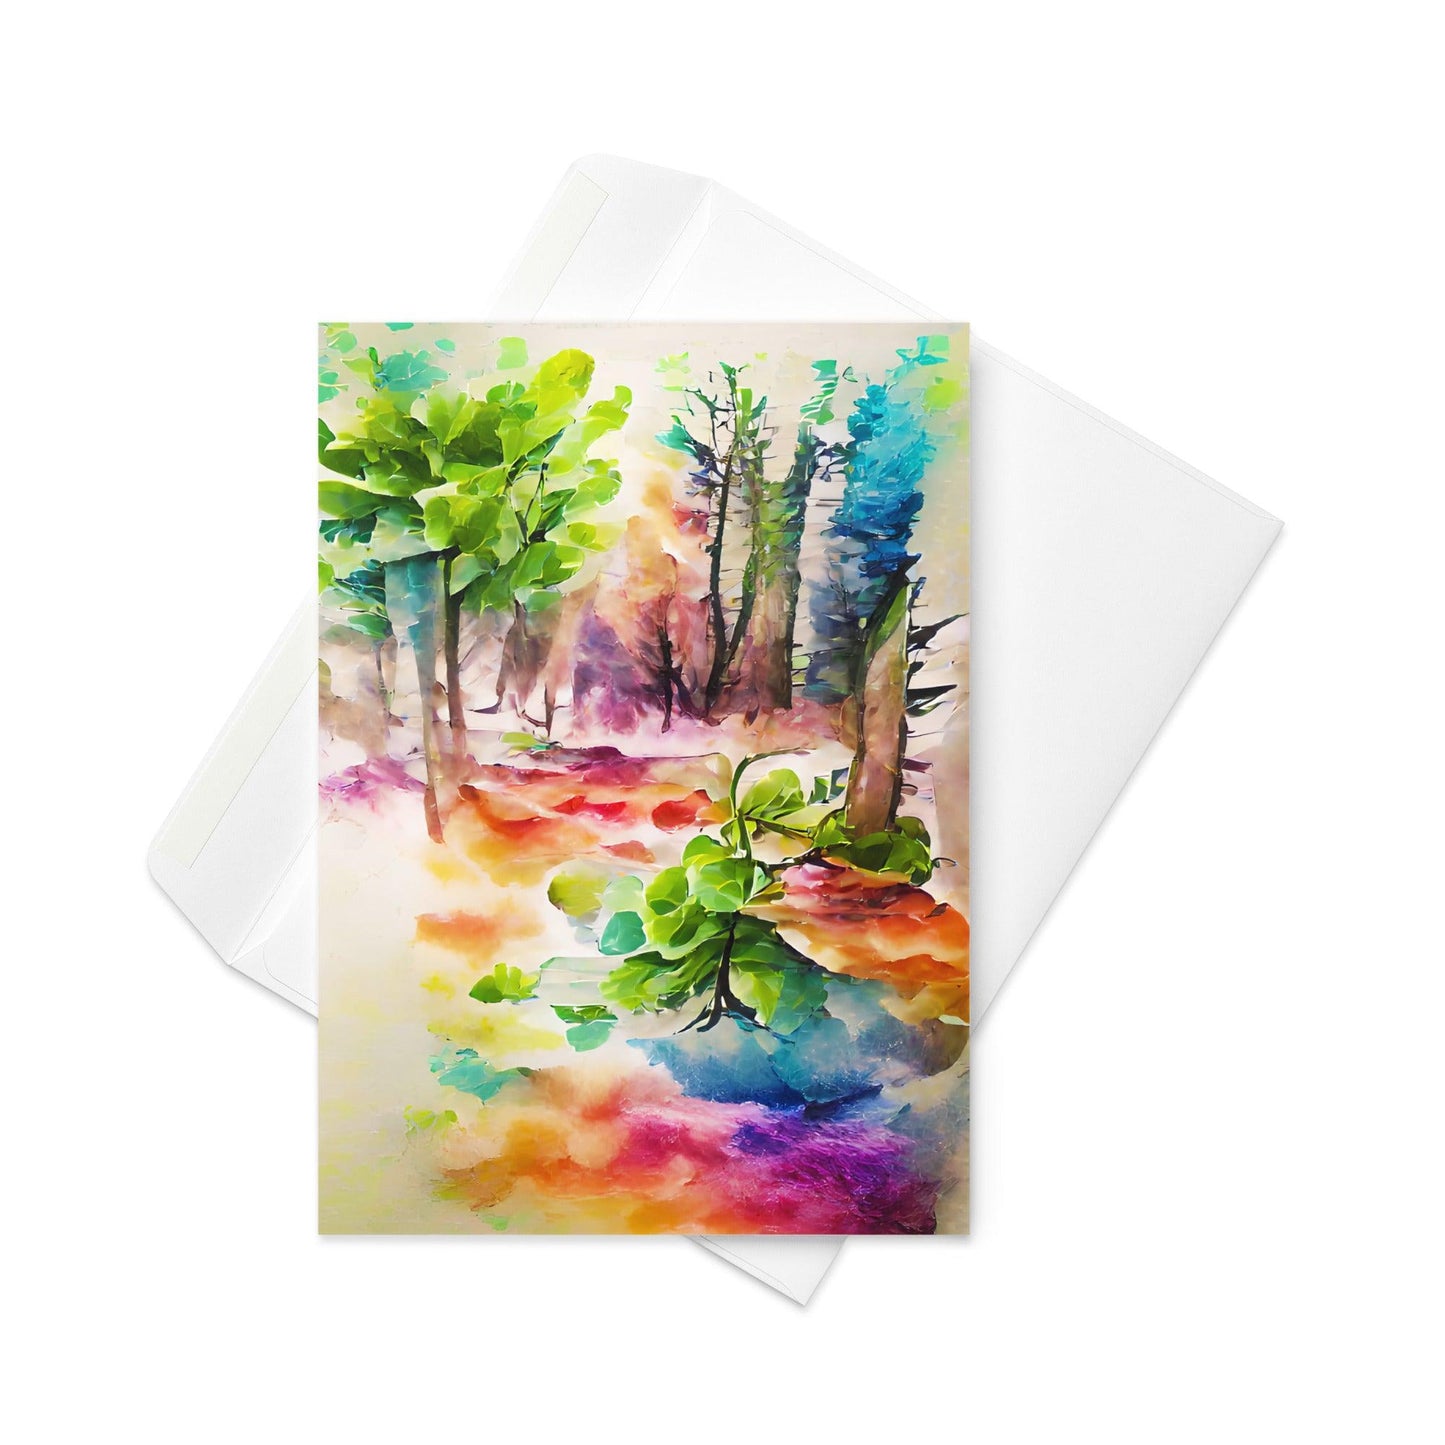 Colourwood Forest - Note Card - iSAW Company